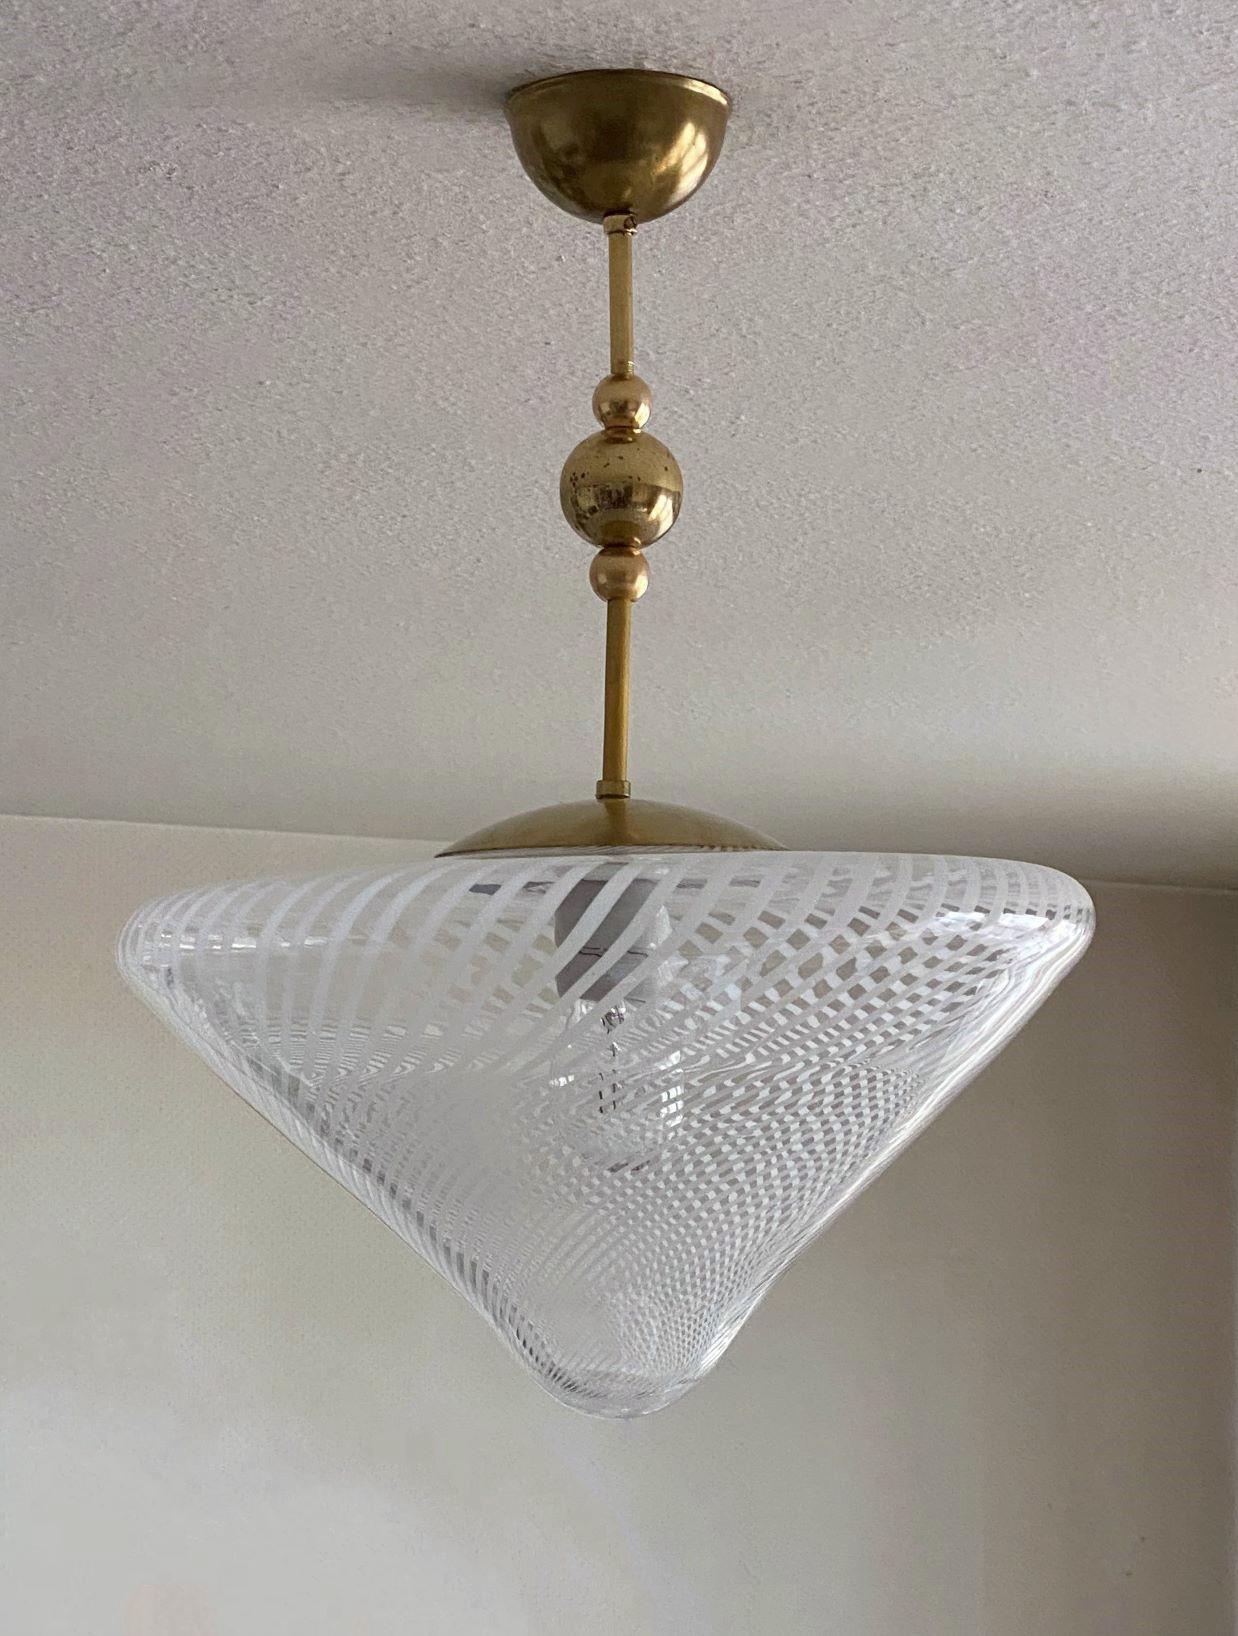 A large Venini flush mount or pendant attributed to Ludovico Diaz de Santillana, Series -Tessuto-, Italy, 1960s. Hand blown from white and clear Murano glass in conical shape, brass mounts.
It takes one E27 large sized bulb up to 100watt. LED bulbs